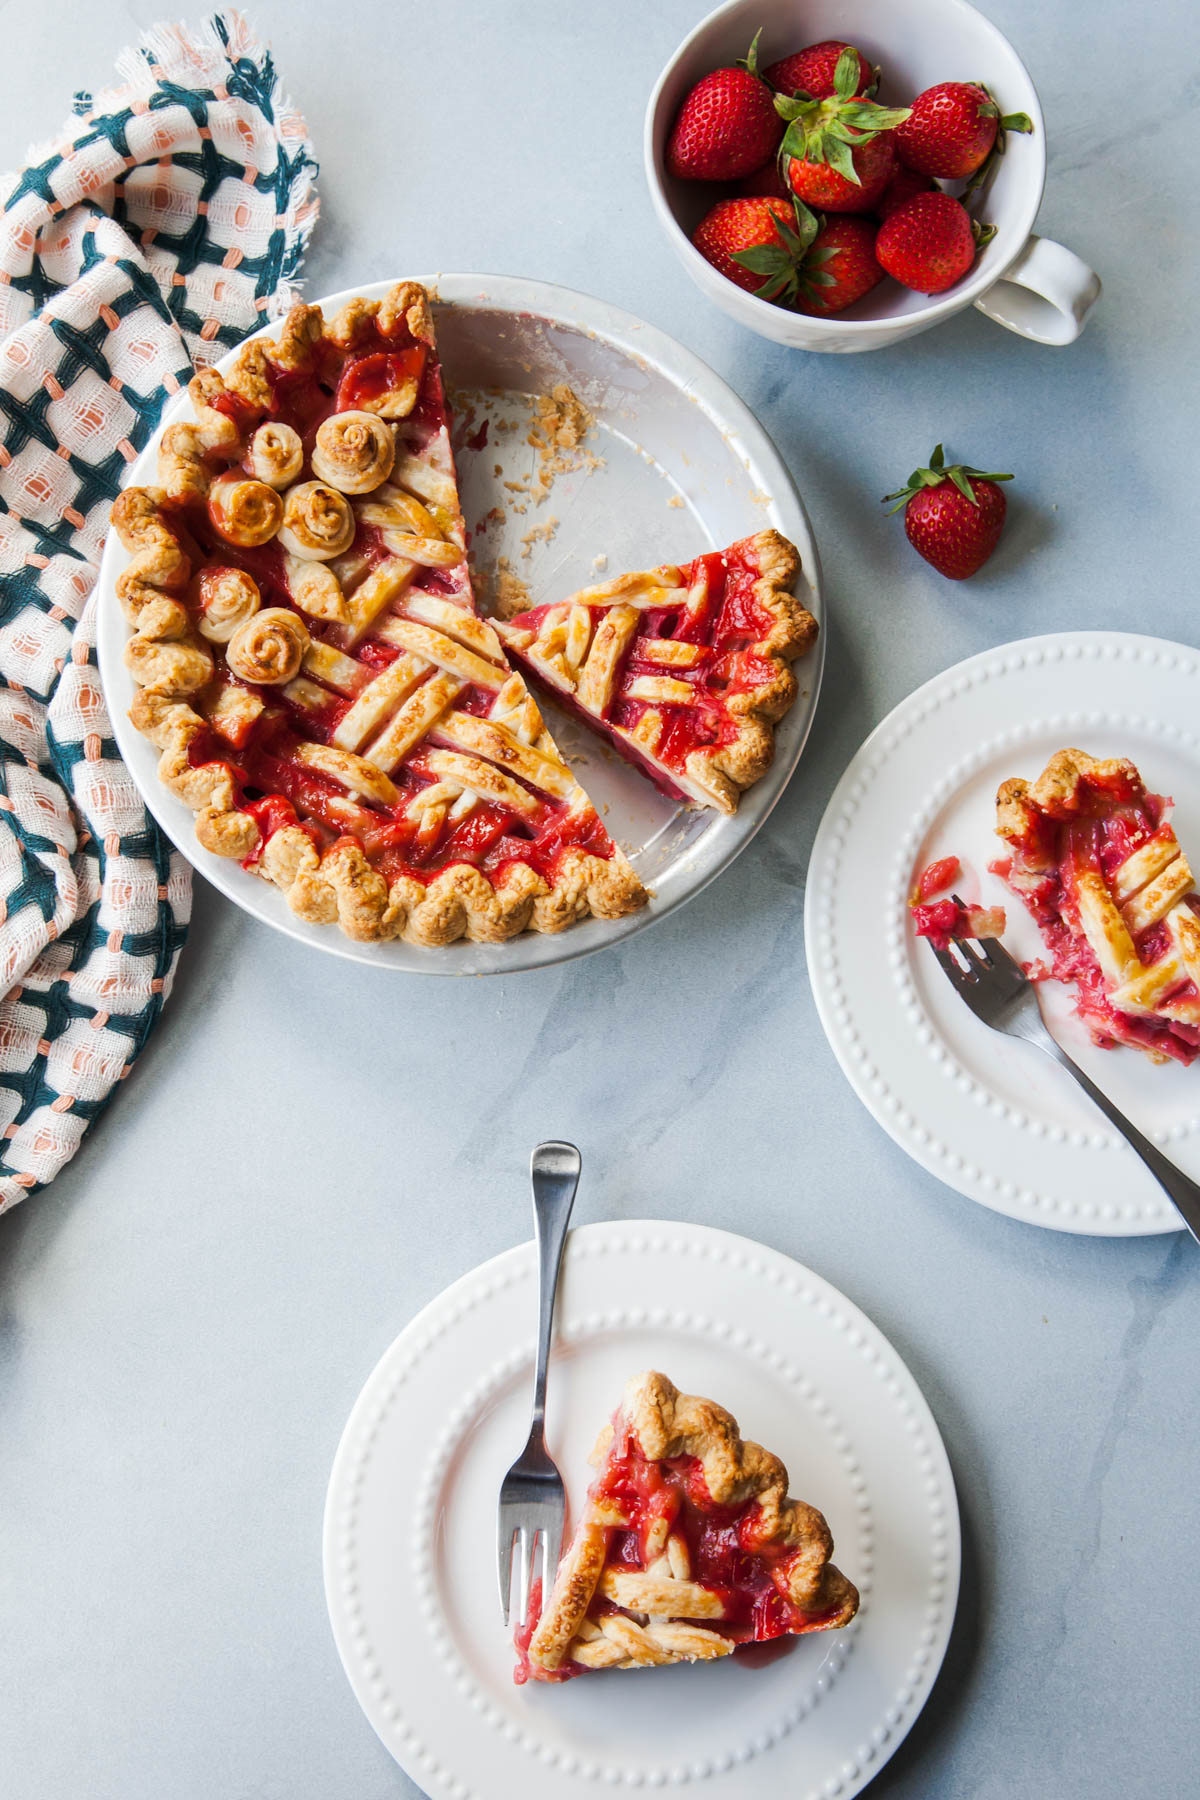 Slices of bright red strawberry rhubarb pie